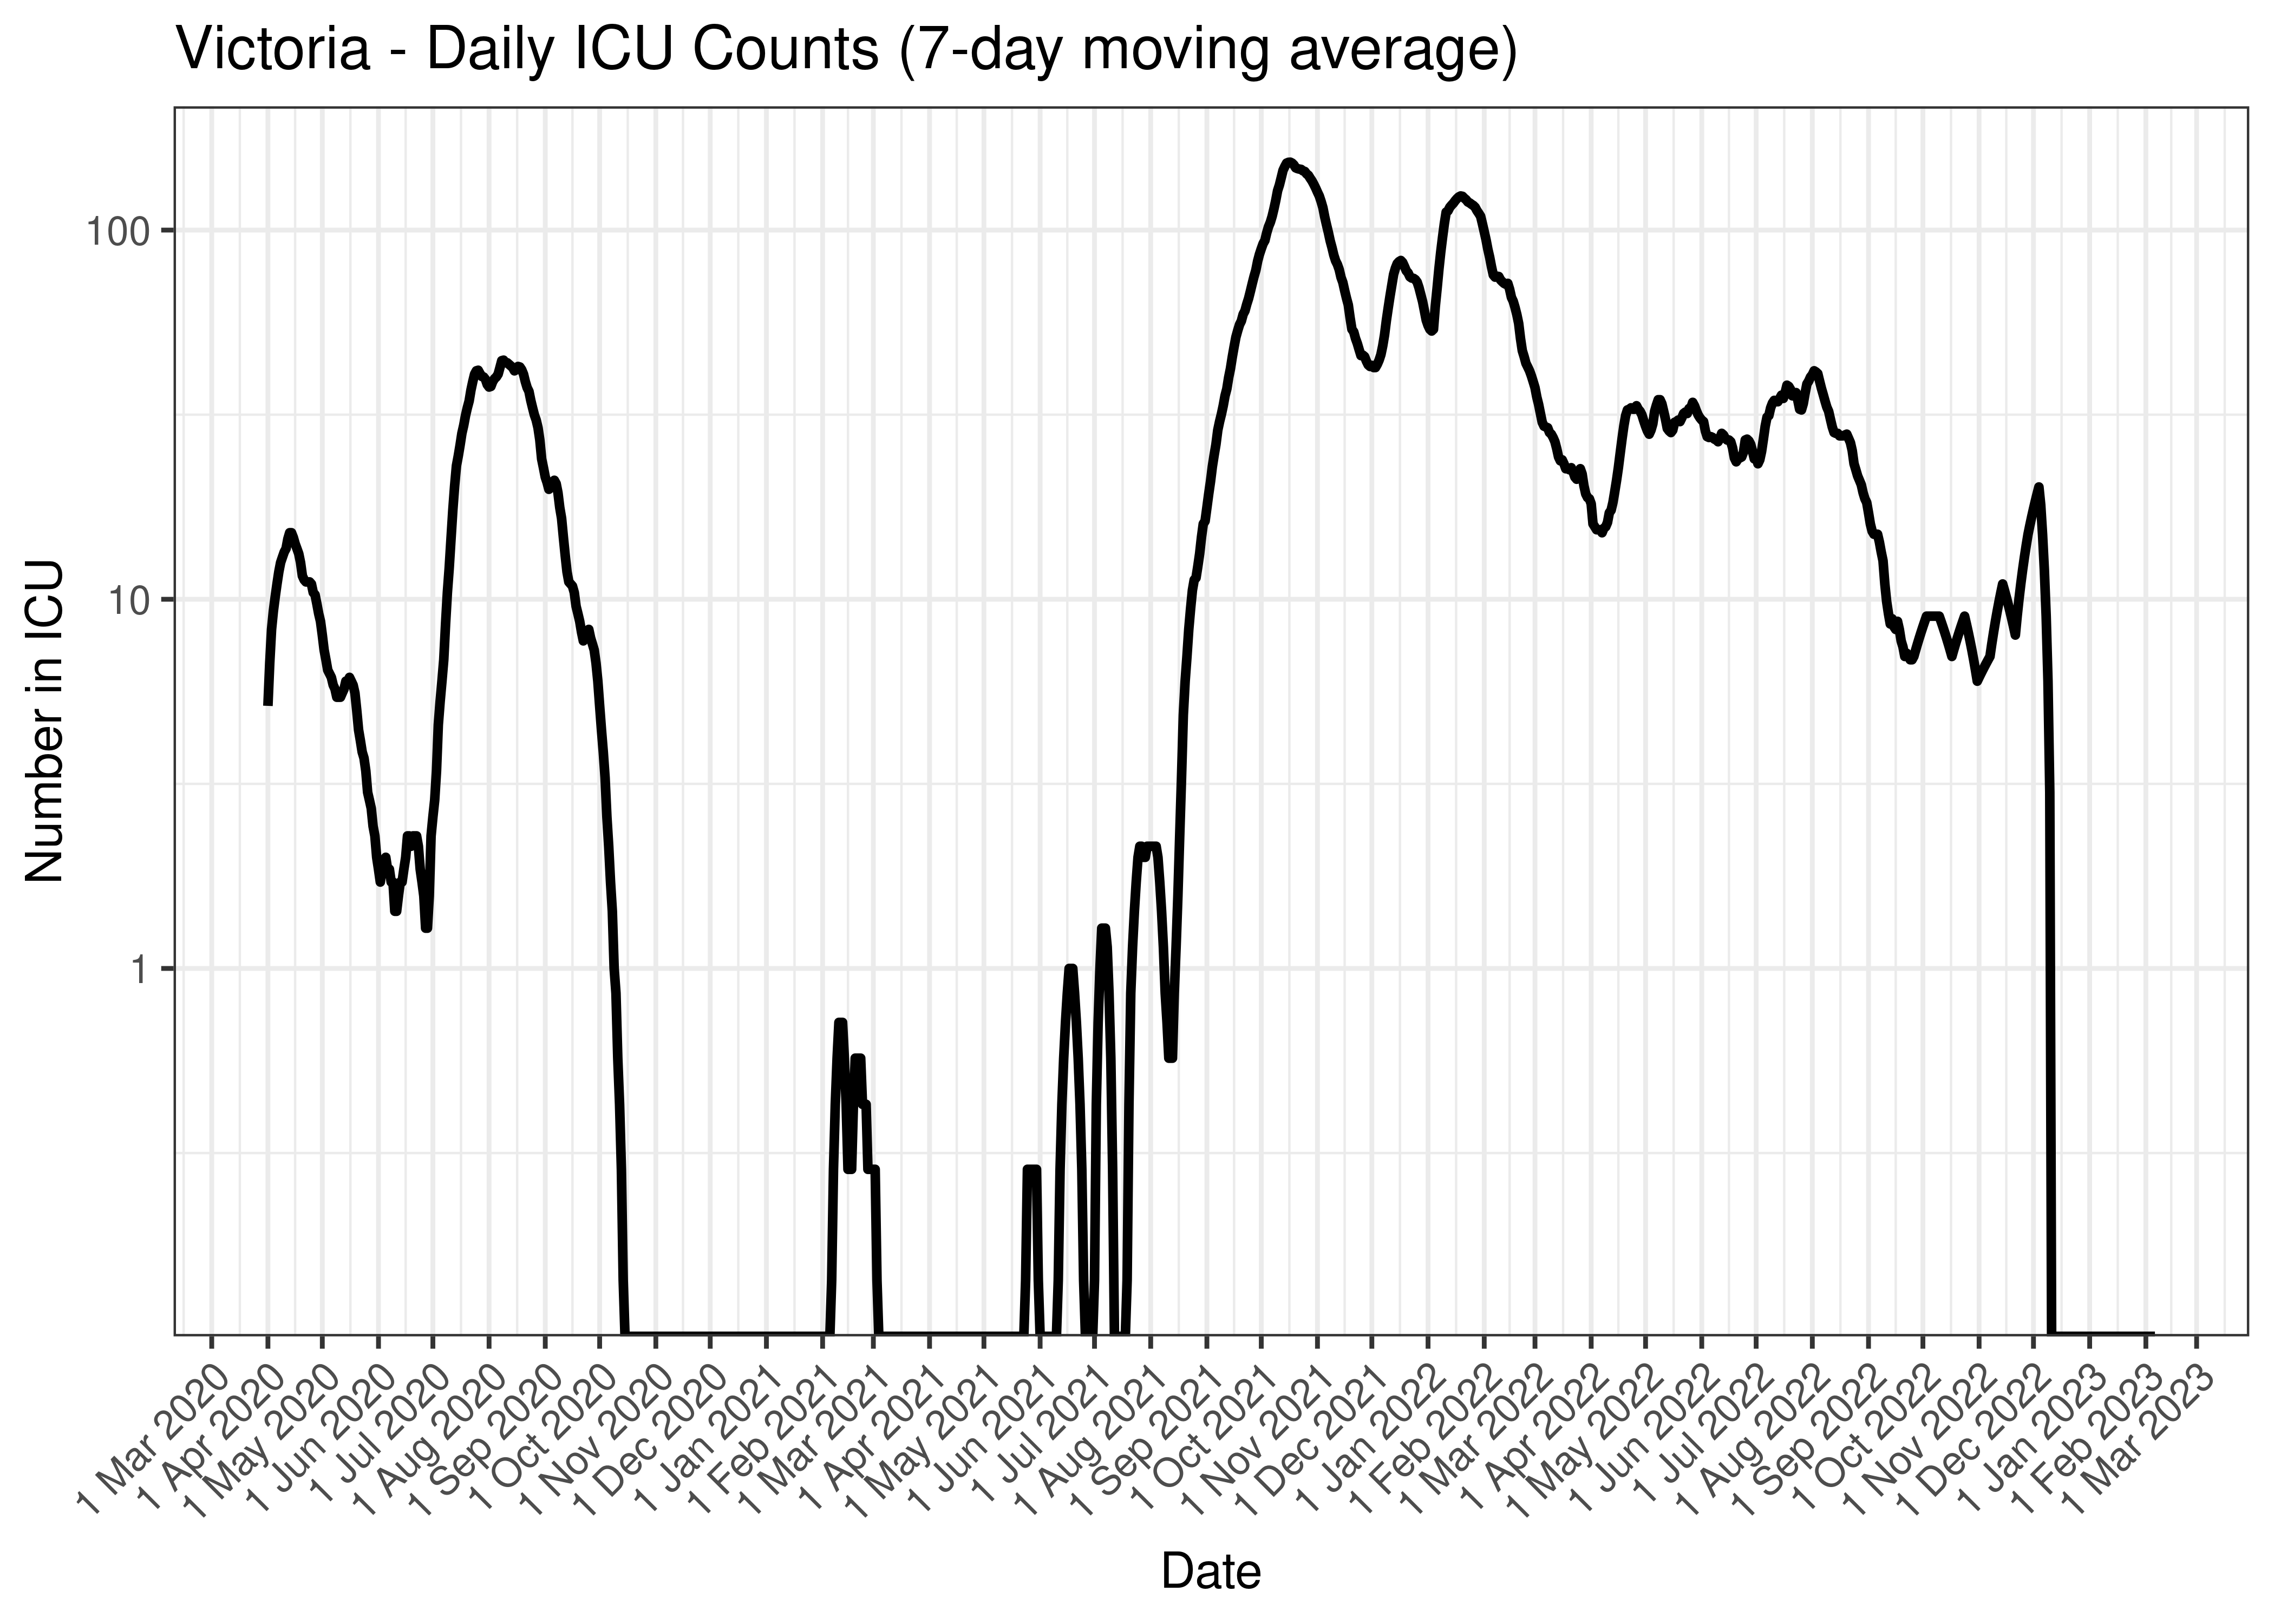 Victoria - Daily ICU Counts (7-day moving average)